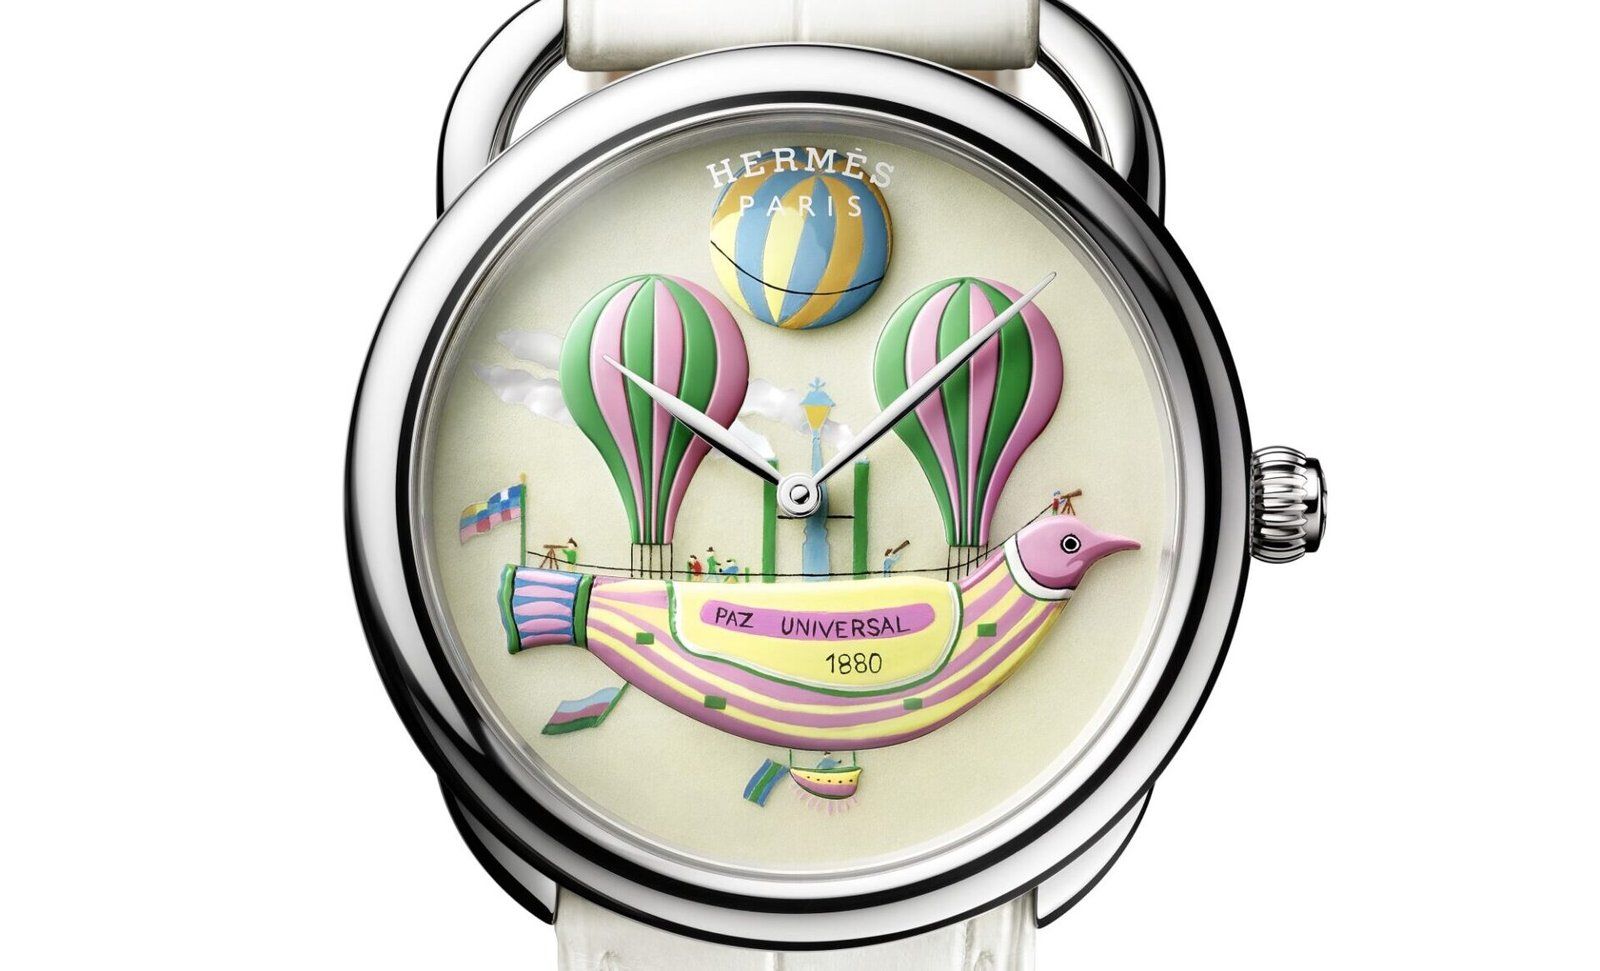 Watches & Wonders 2022: Hermes- Flying High With The Arceau Les Folies du Ciel Watch